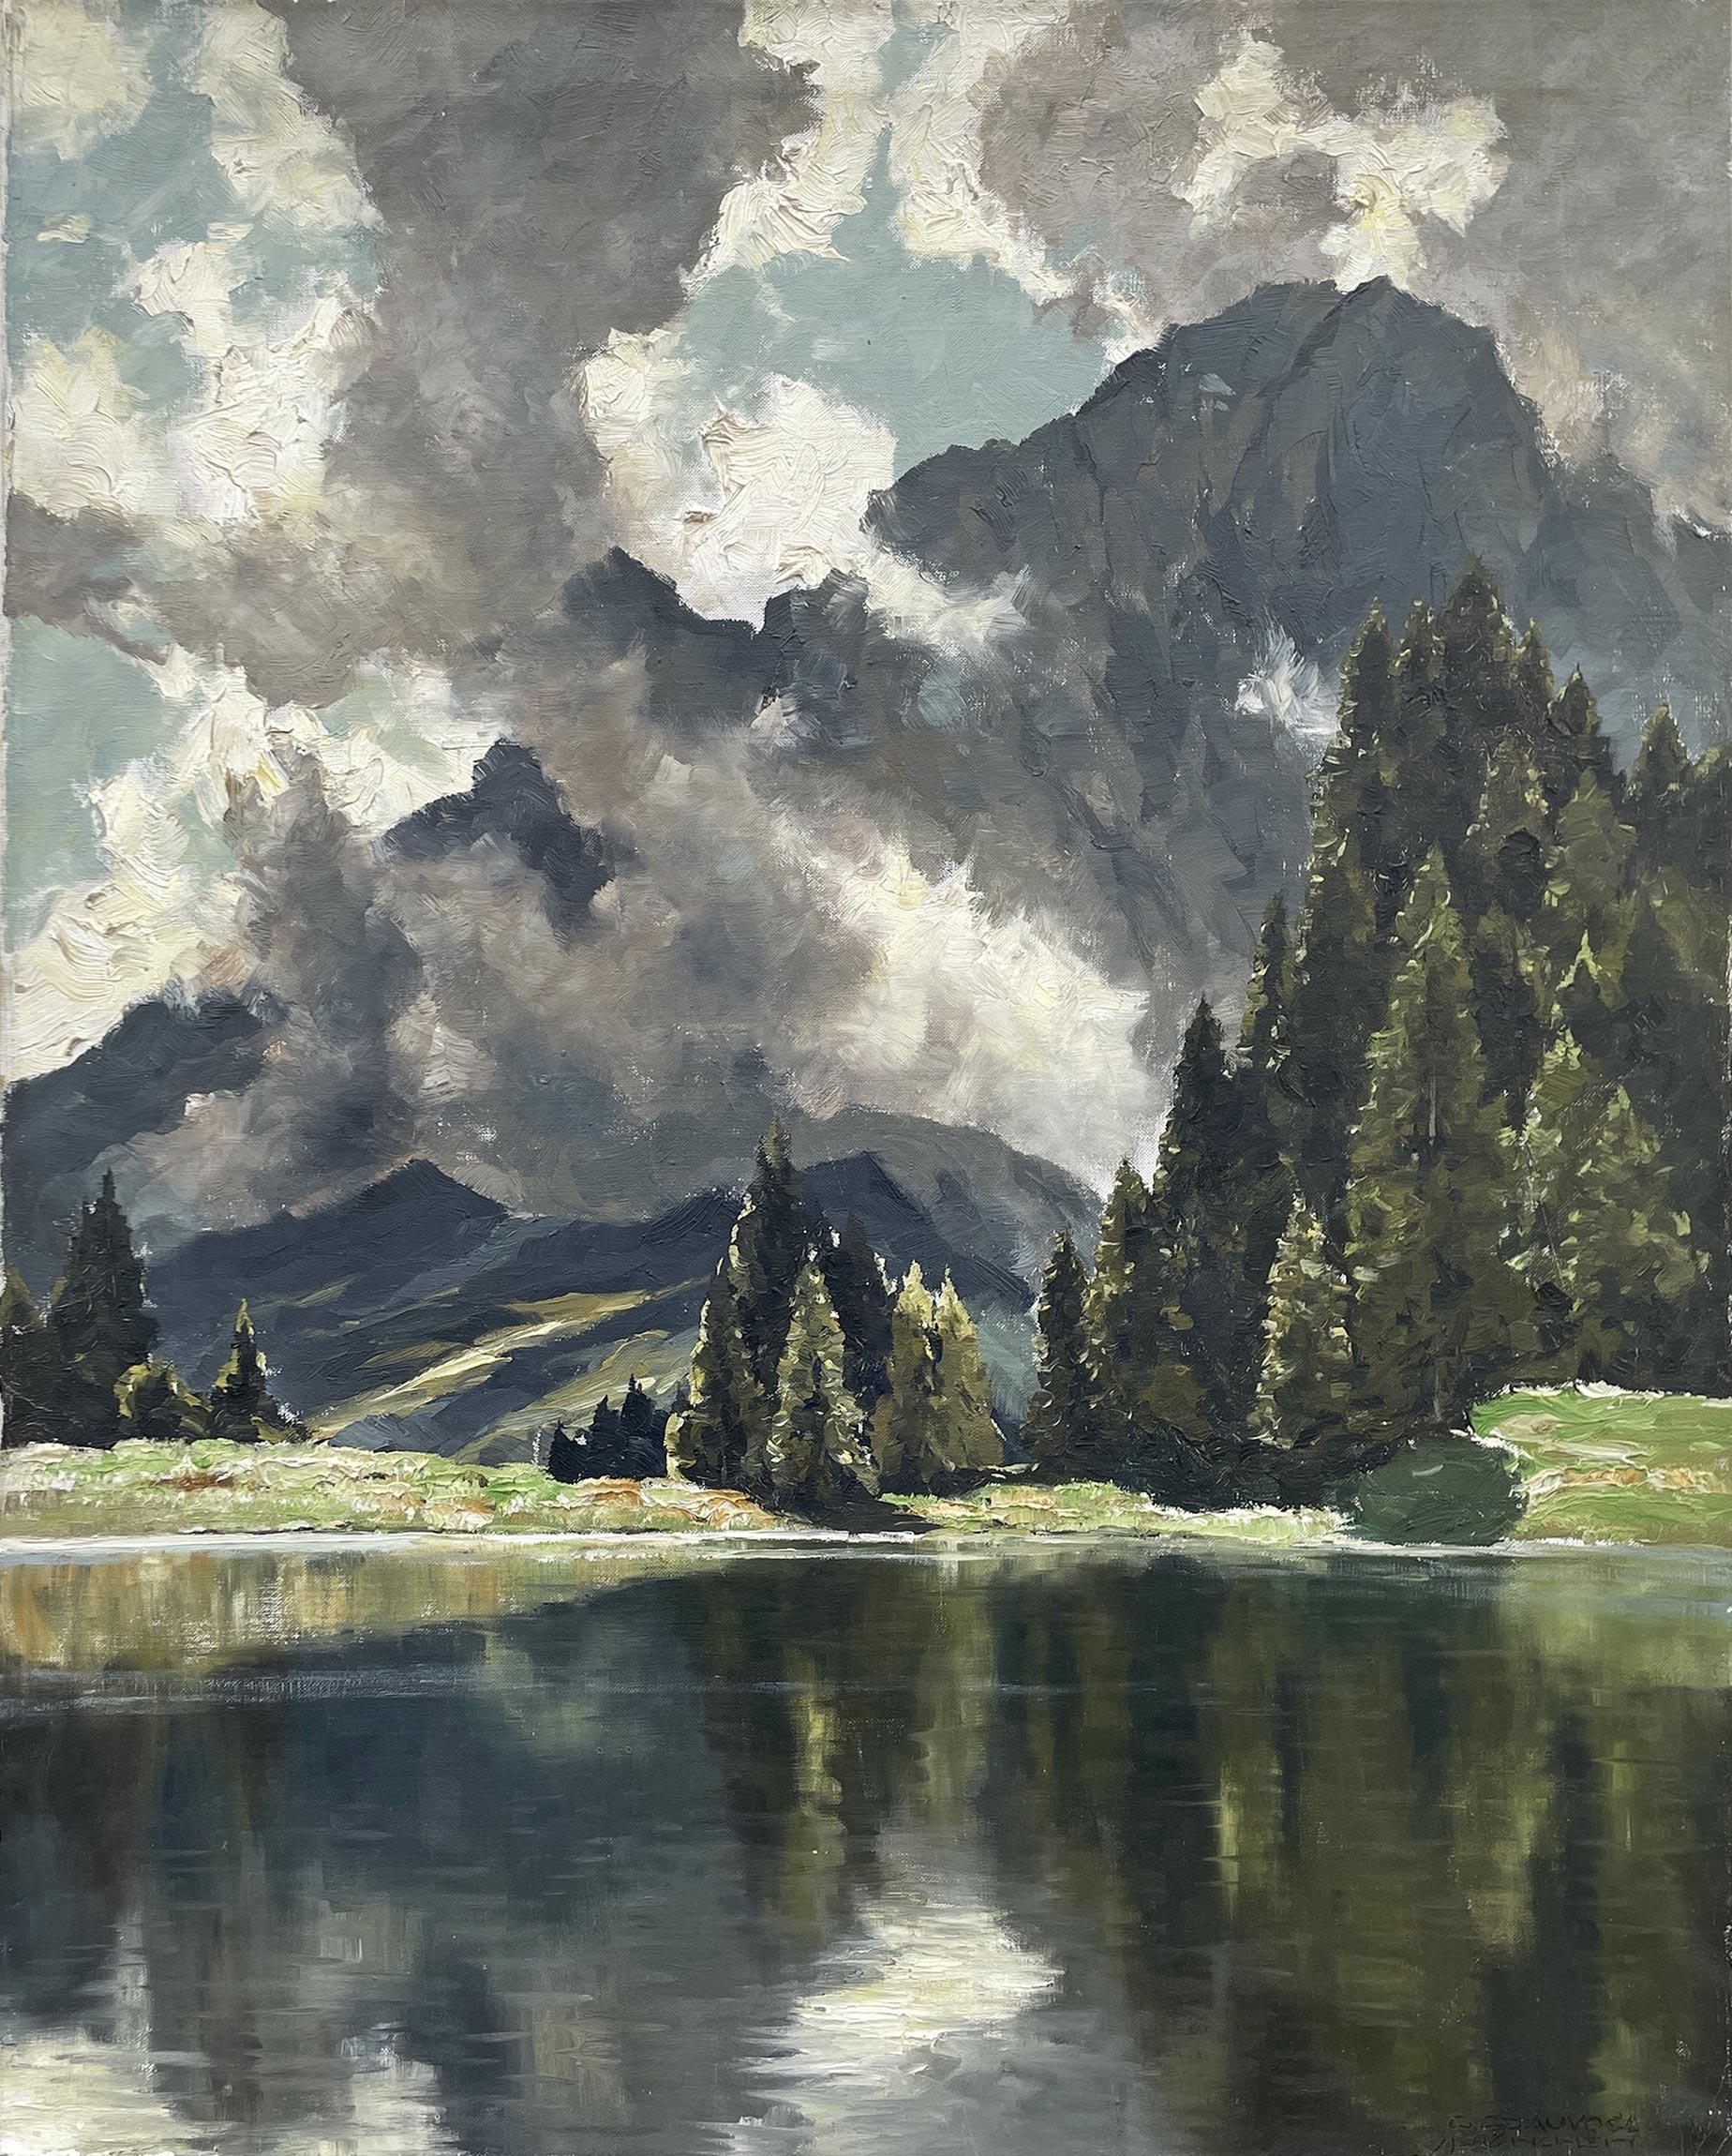 Lake Limides and Tofane – Georg Grauvogl (1896 – 1986)

100 x 80 cm without frame
104 x 84 cm with antique fir frame
oil painting on canvas
1930s

The suggestive Lake Limides on a summer day. Immersive painting full of contrasts, in the typical